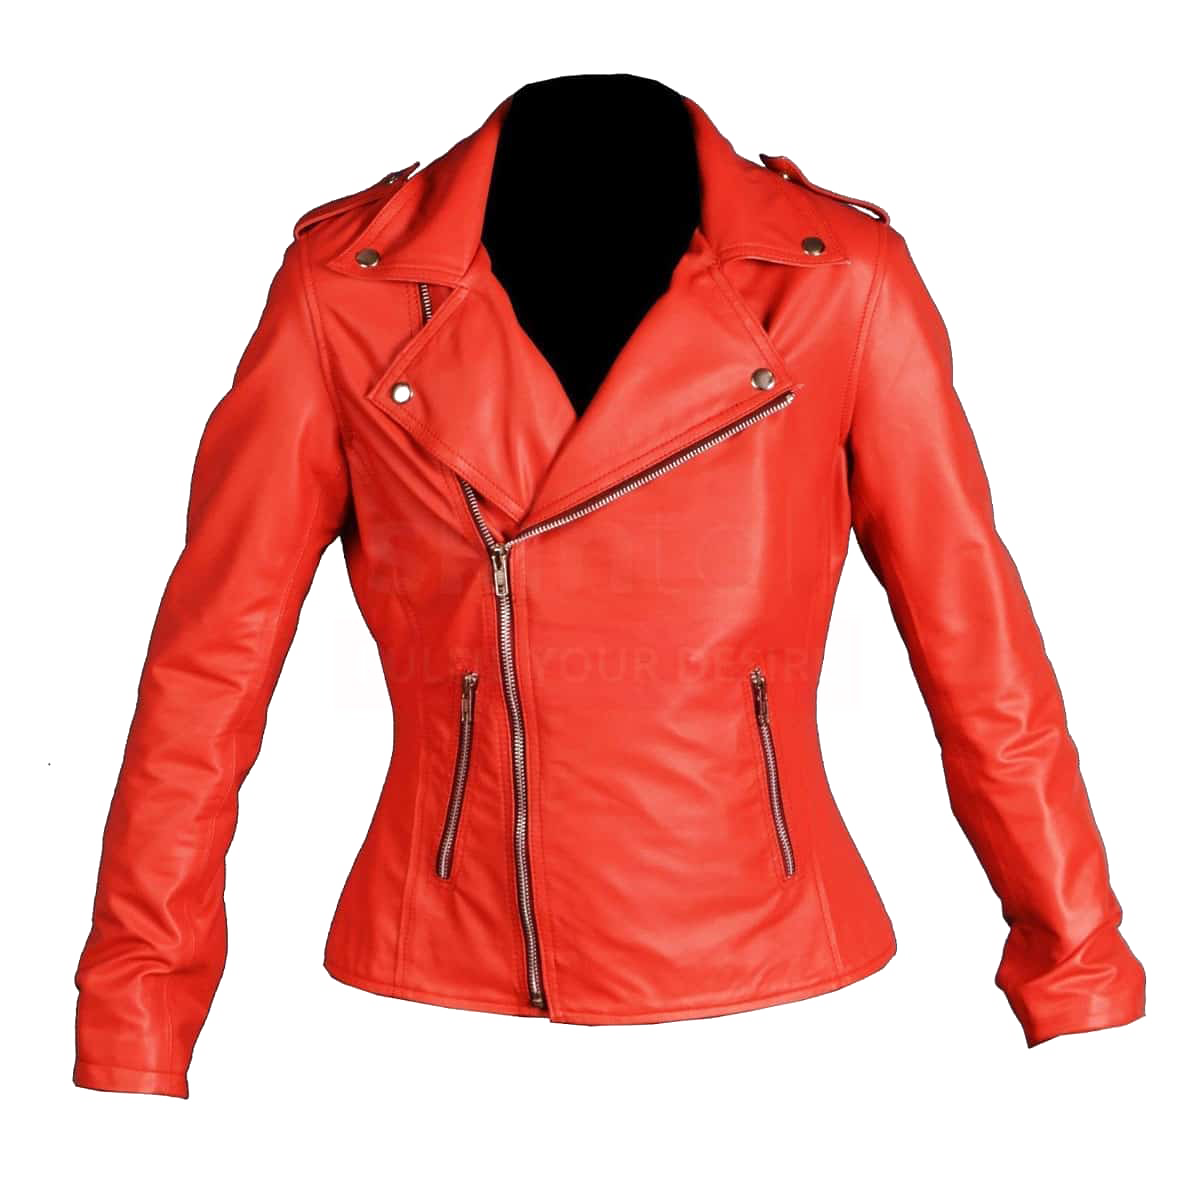 Red Leather Jacket PNG High-Quality Image